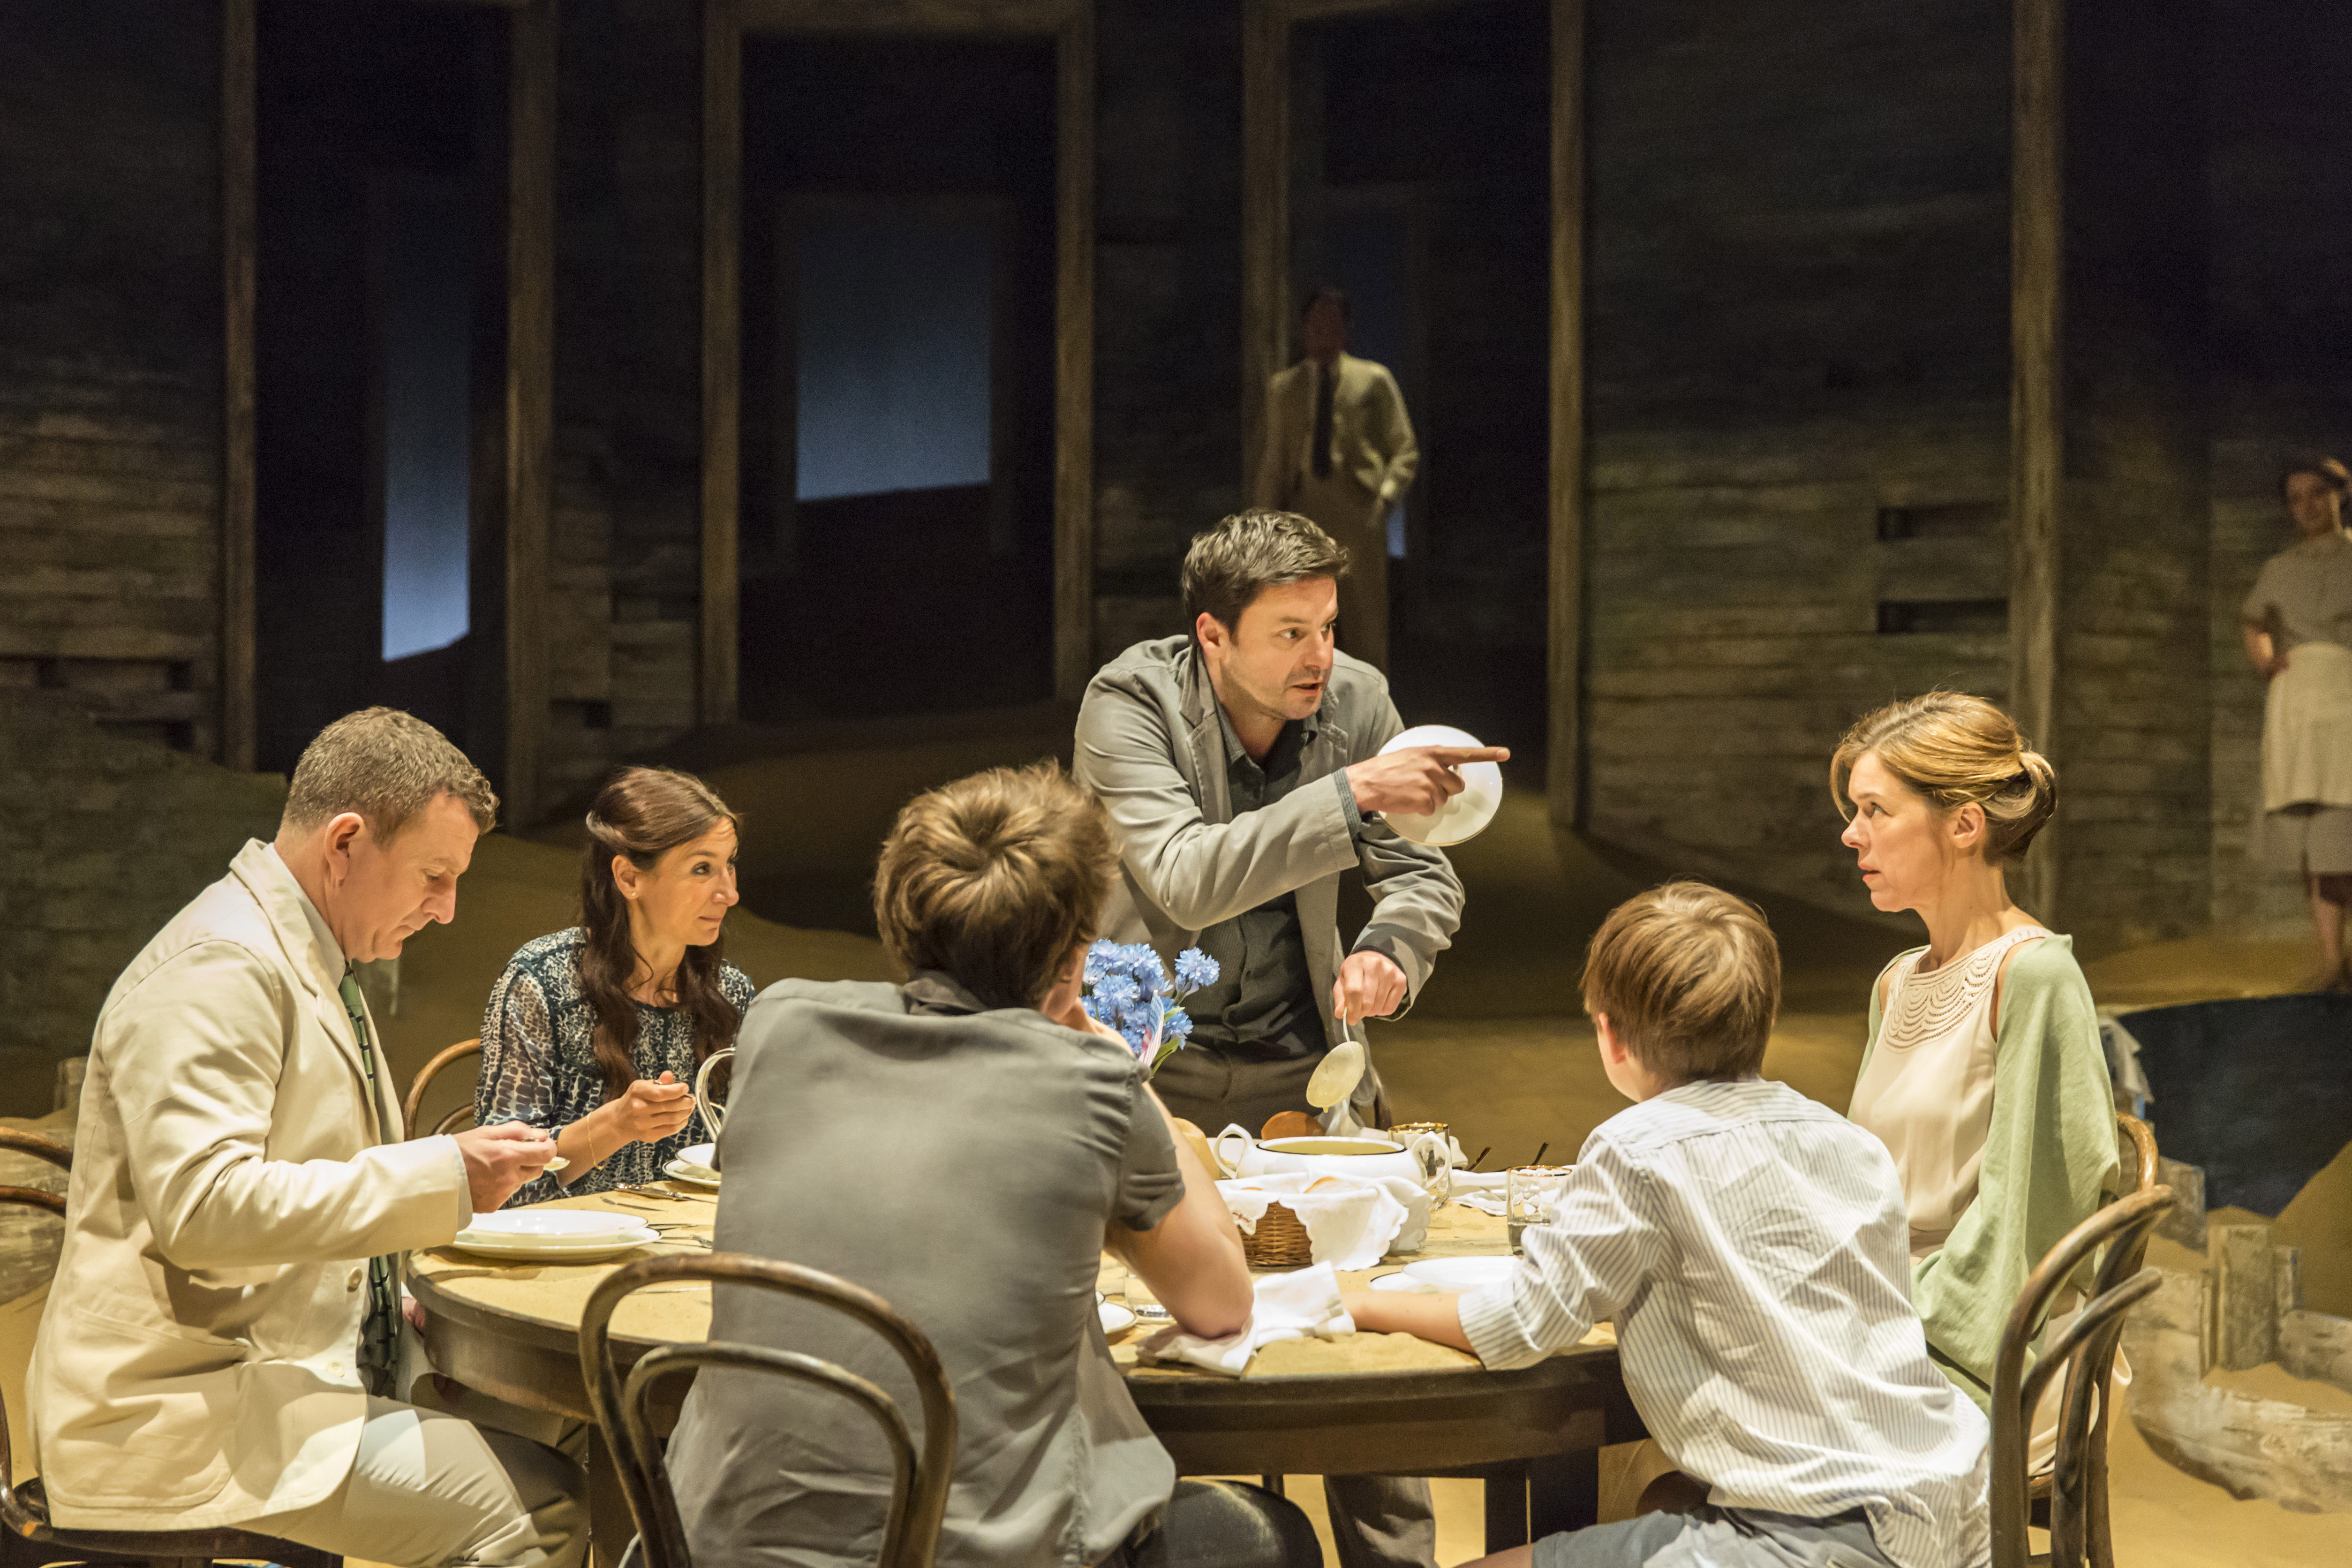 Members of the company in in Ah, Wilderness! at the Young Vic. Photo by Johan Persson.